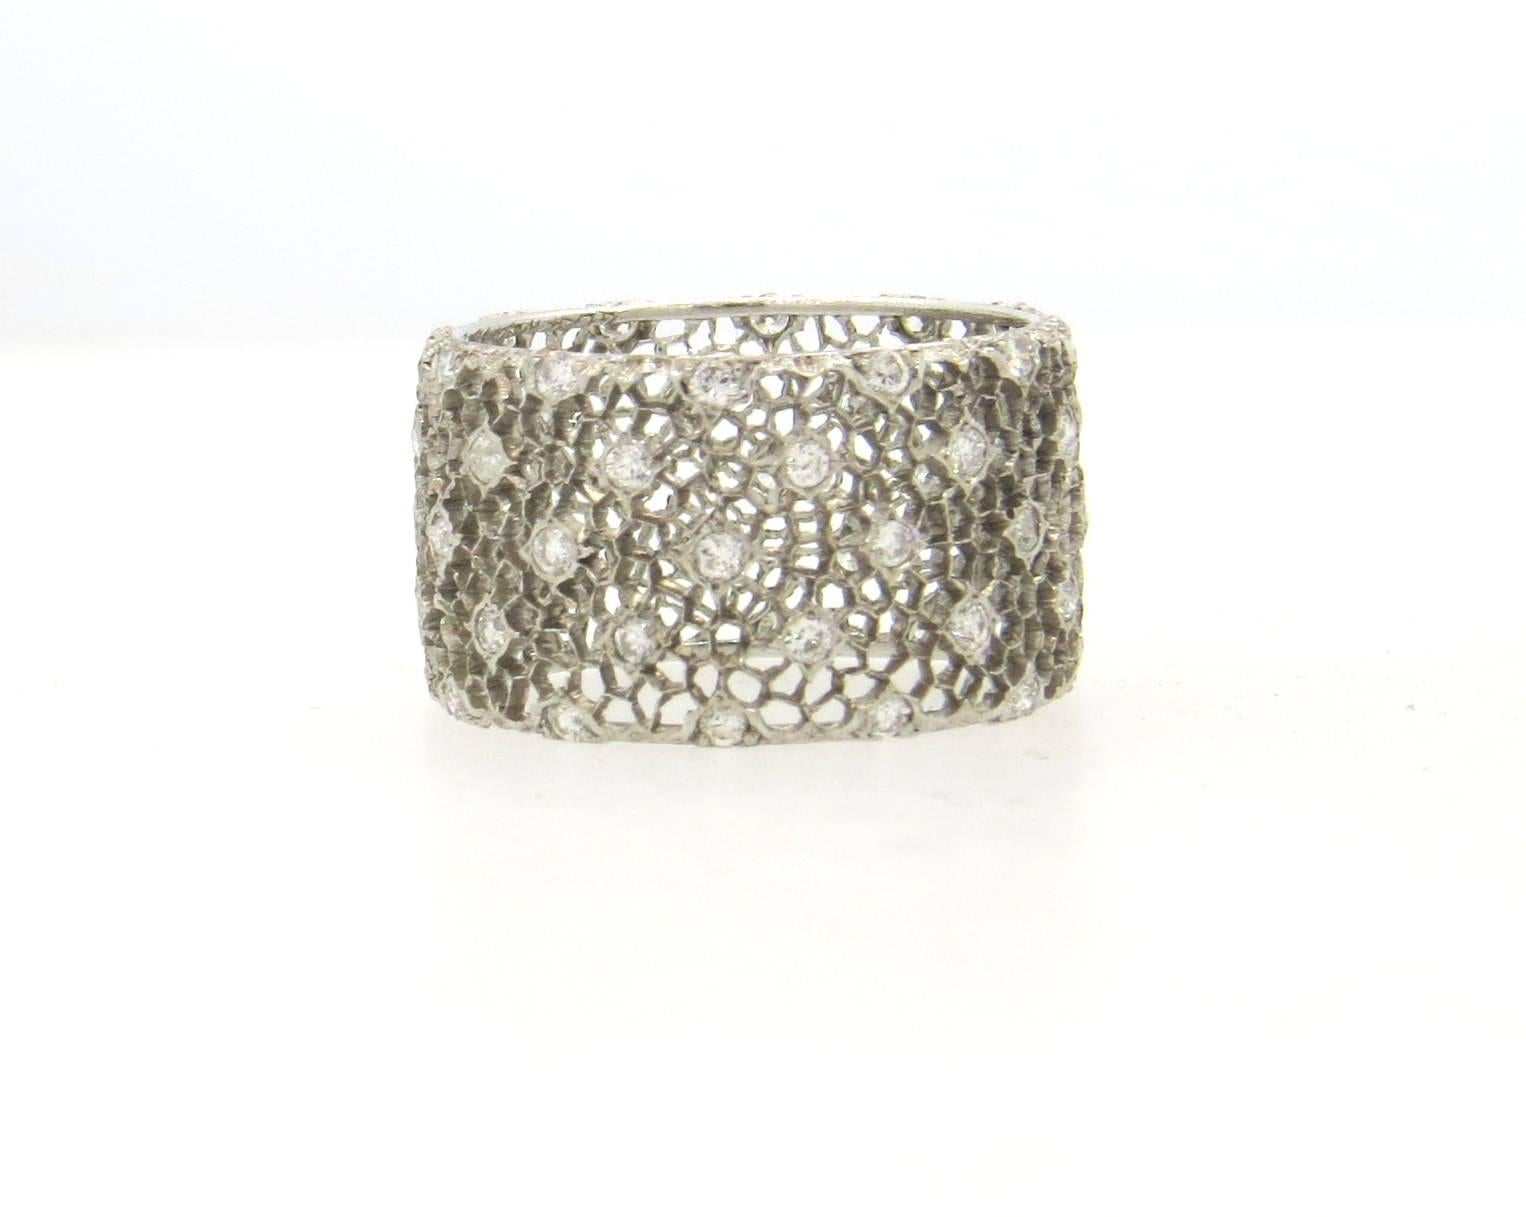 Wide 18k white gold wedding band, crafted by Buccellati, featyuring honeycomb lace design, decorated with approximately 0.60ctw in H/VS diamonds. Ring size  6 1/4, ring is 11.5mm wide. Marked: Buccellati 18k. Weight of the piece - 3.2 grams
